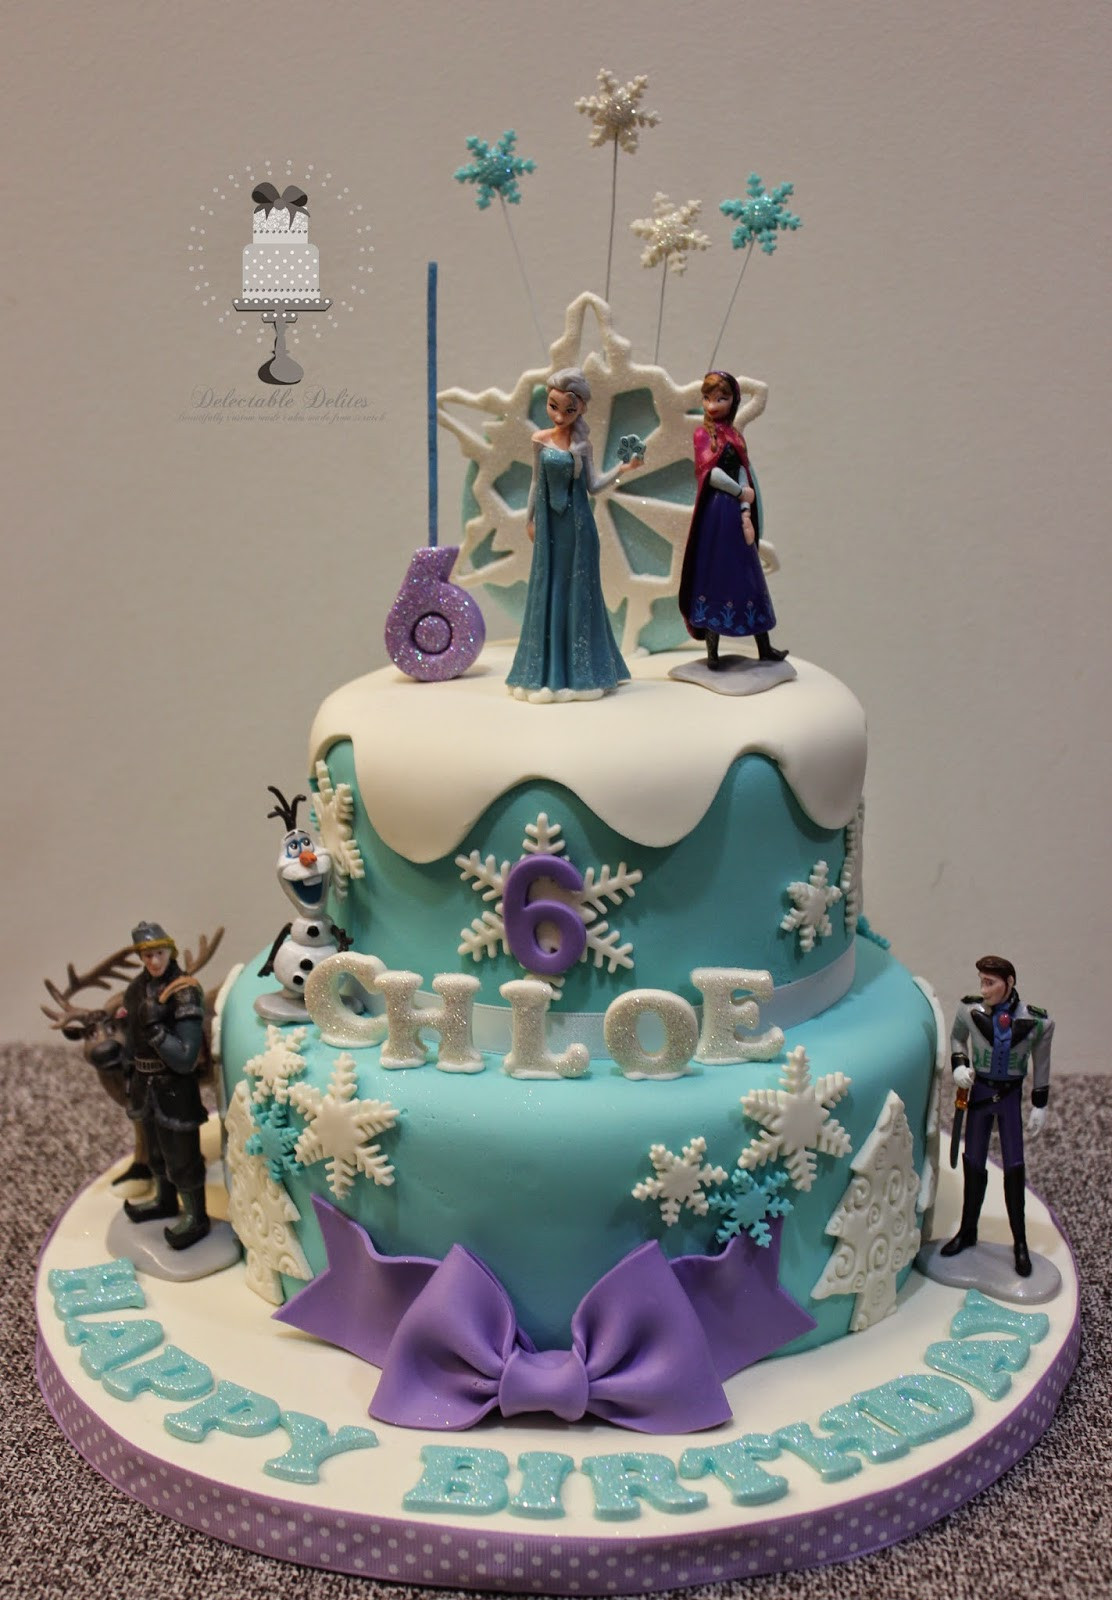 Frozen Birthday Cakes
 Delectable Delites Frozen cake for Chole s 6th birthday